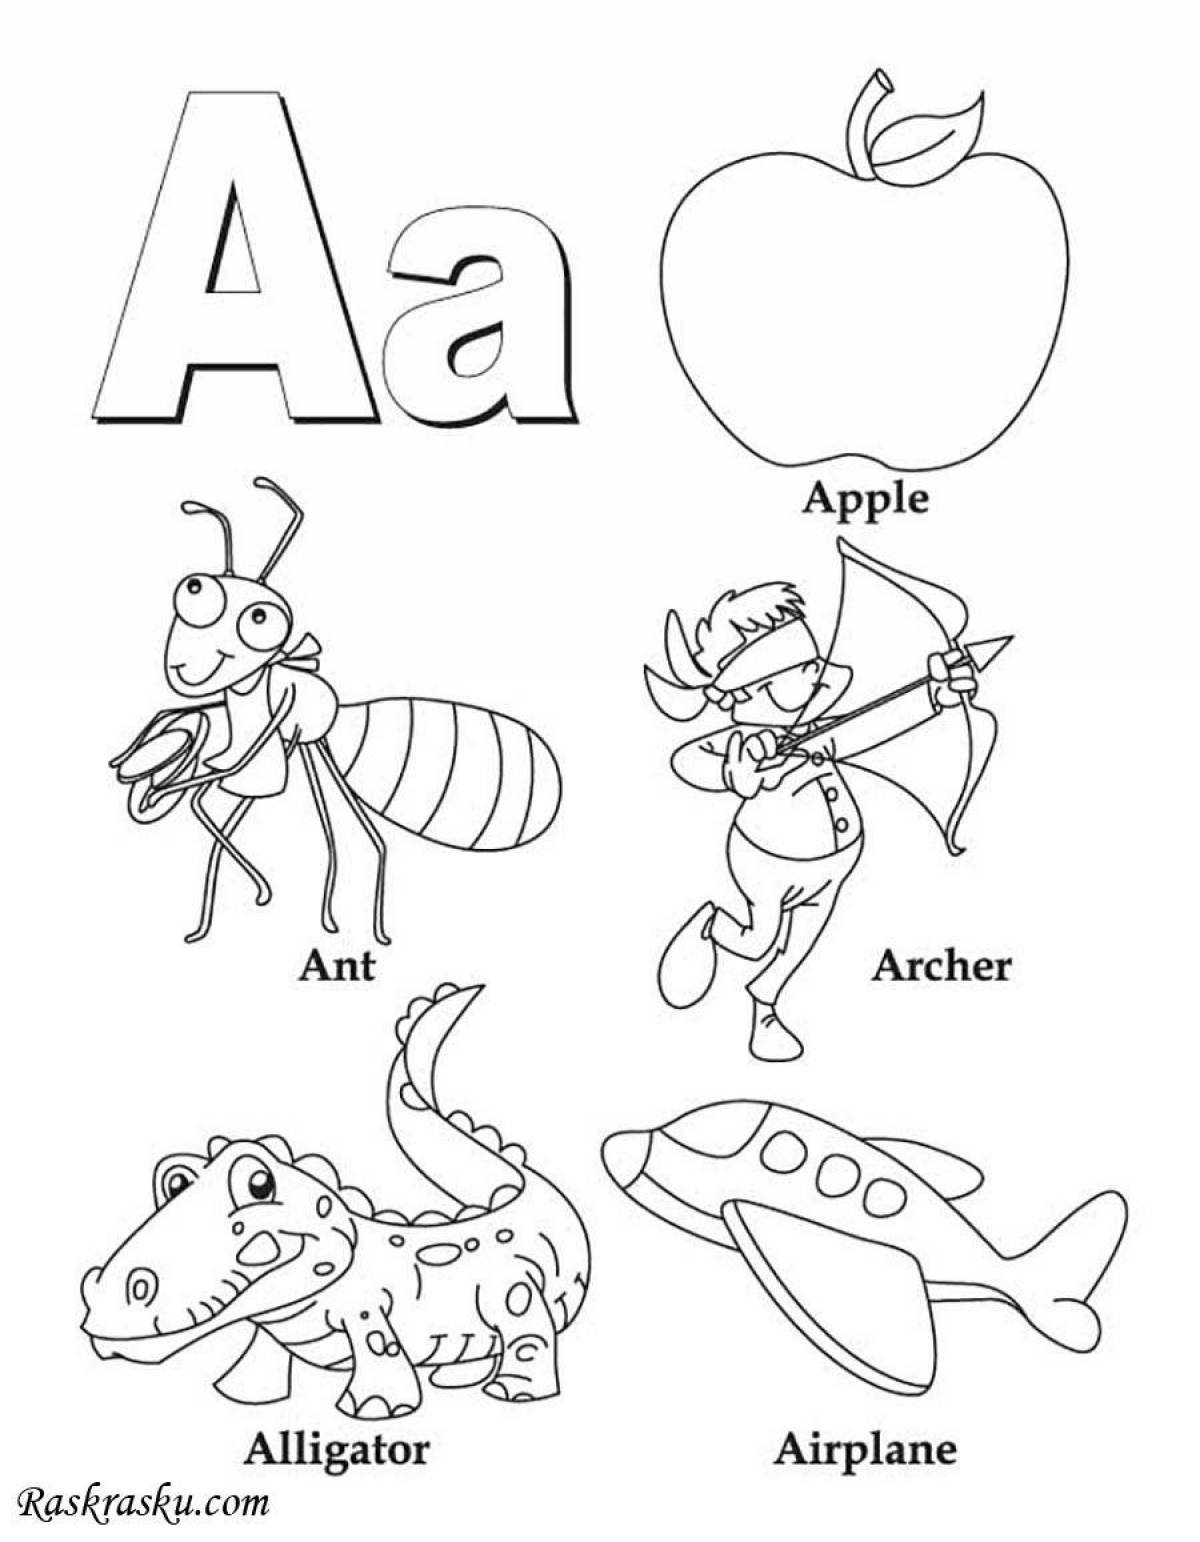 Colorful english alphabet coloring page for kids of all genders